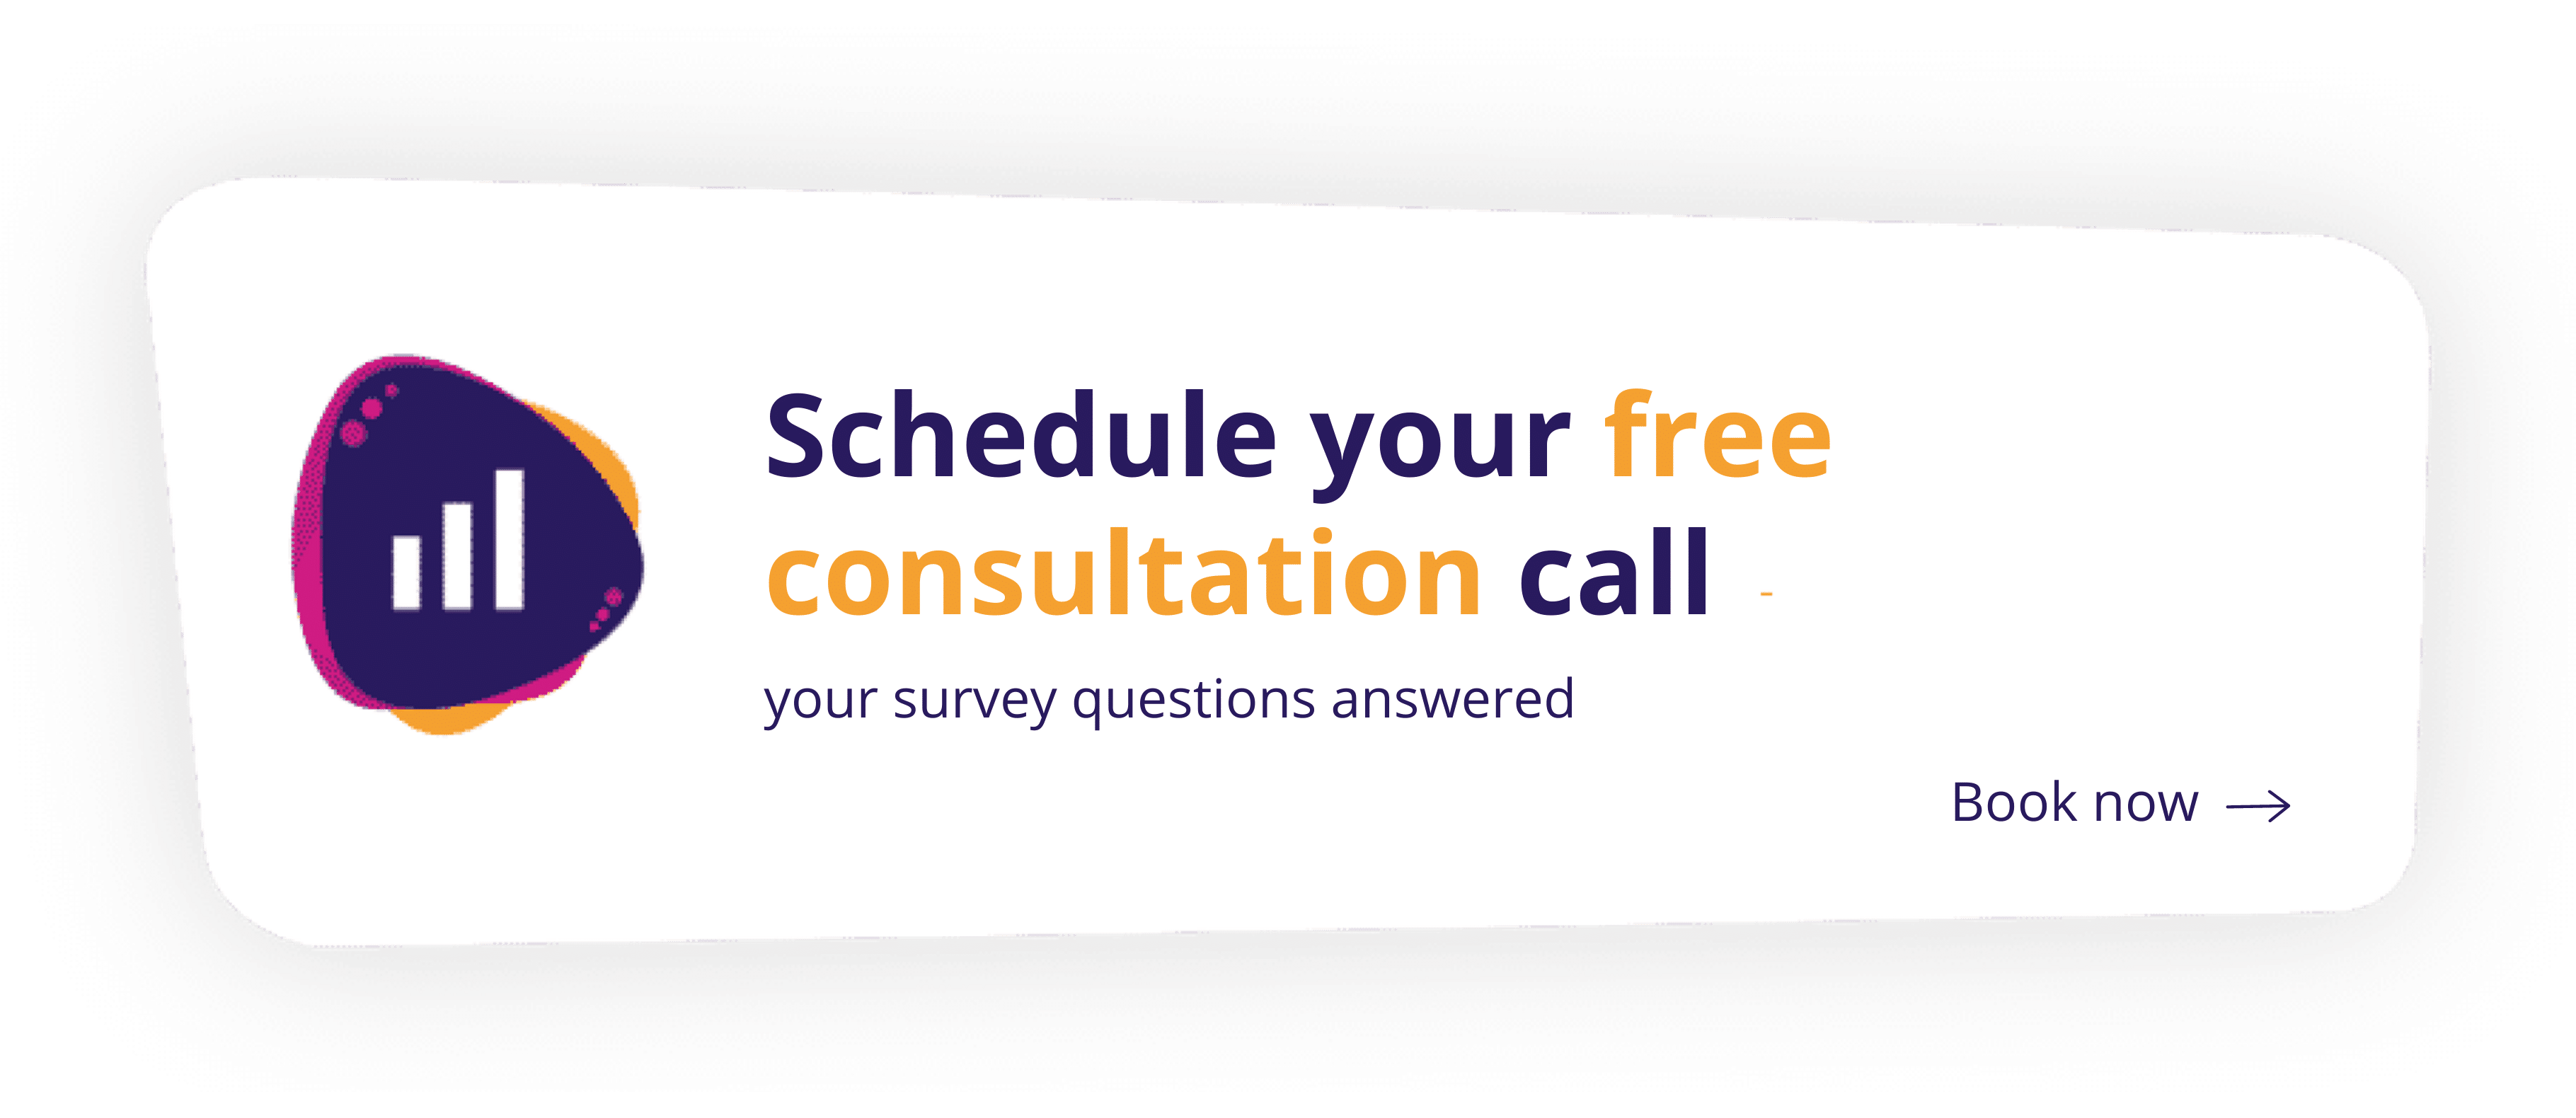 Click here to for a free consultation to take action and start benefitting from surveys and help you clients solve pain points.